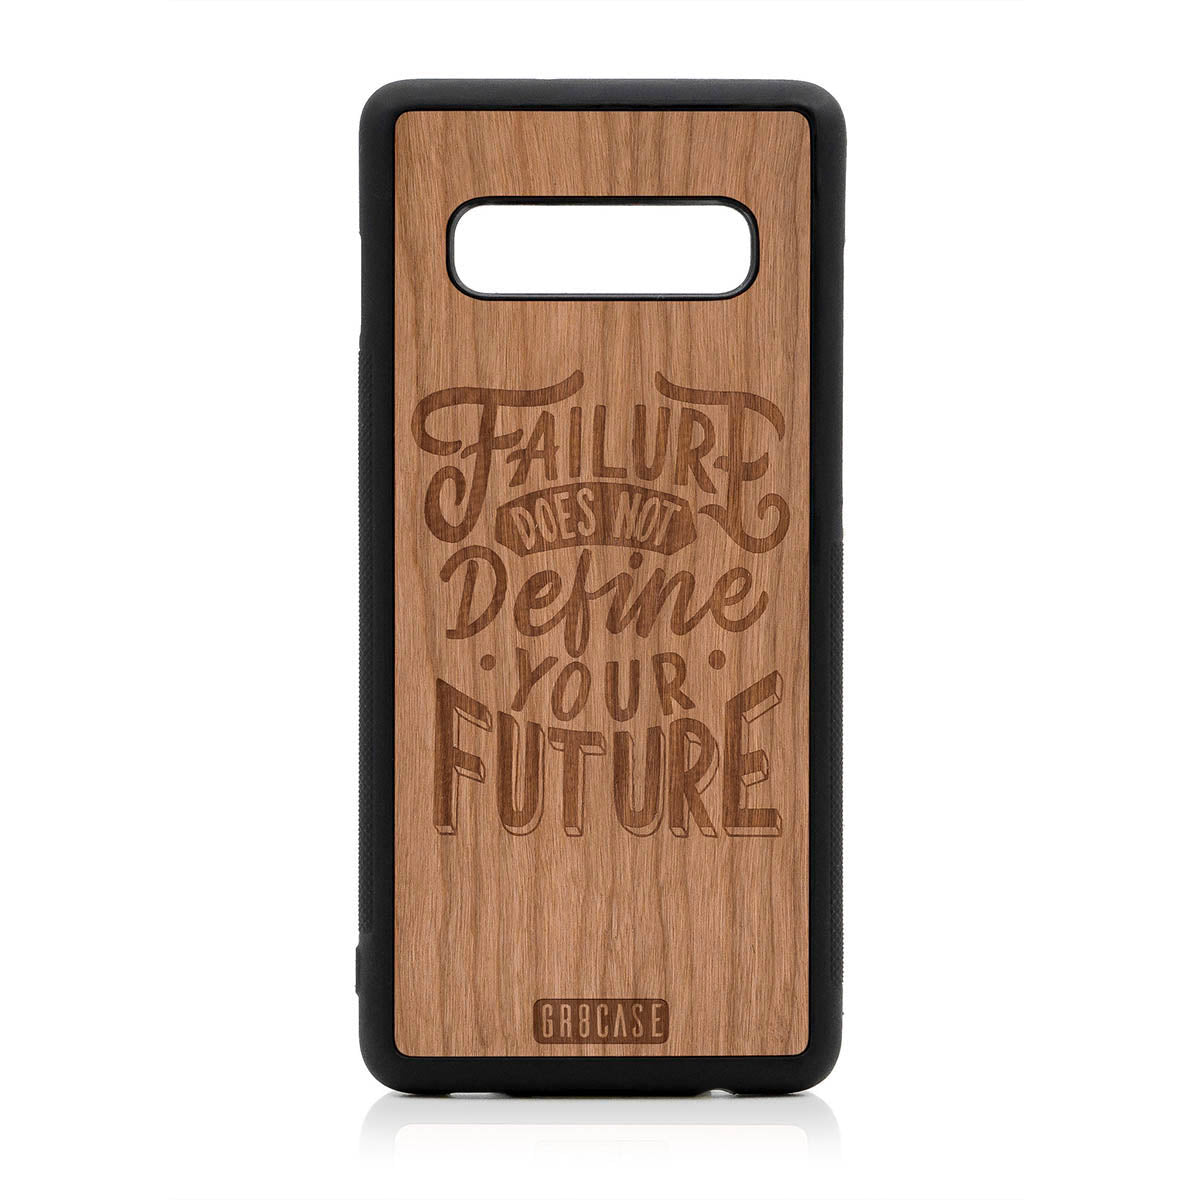 Failure Does Not Define You Future Design Wood Case For Samsung Galaxy S10 Plus by GR8CASE